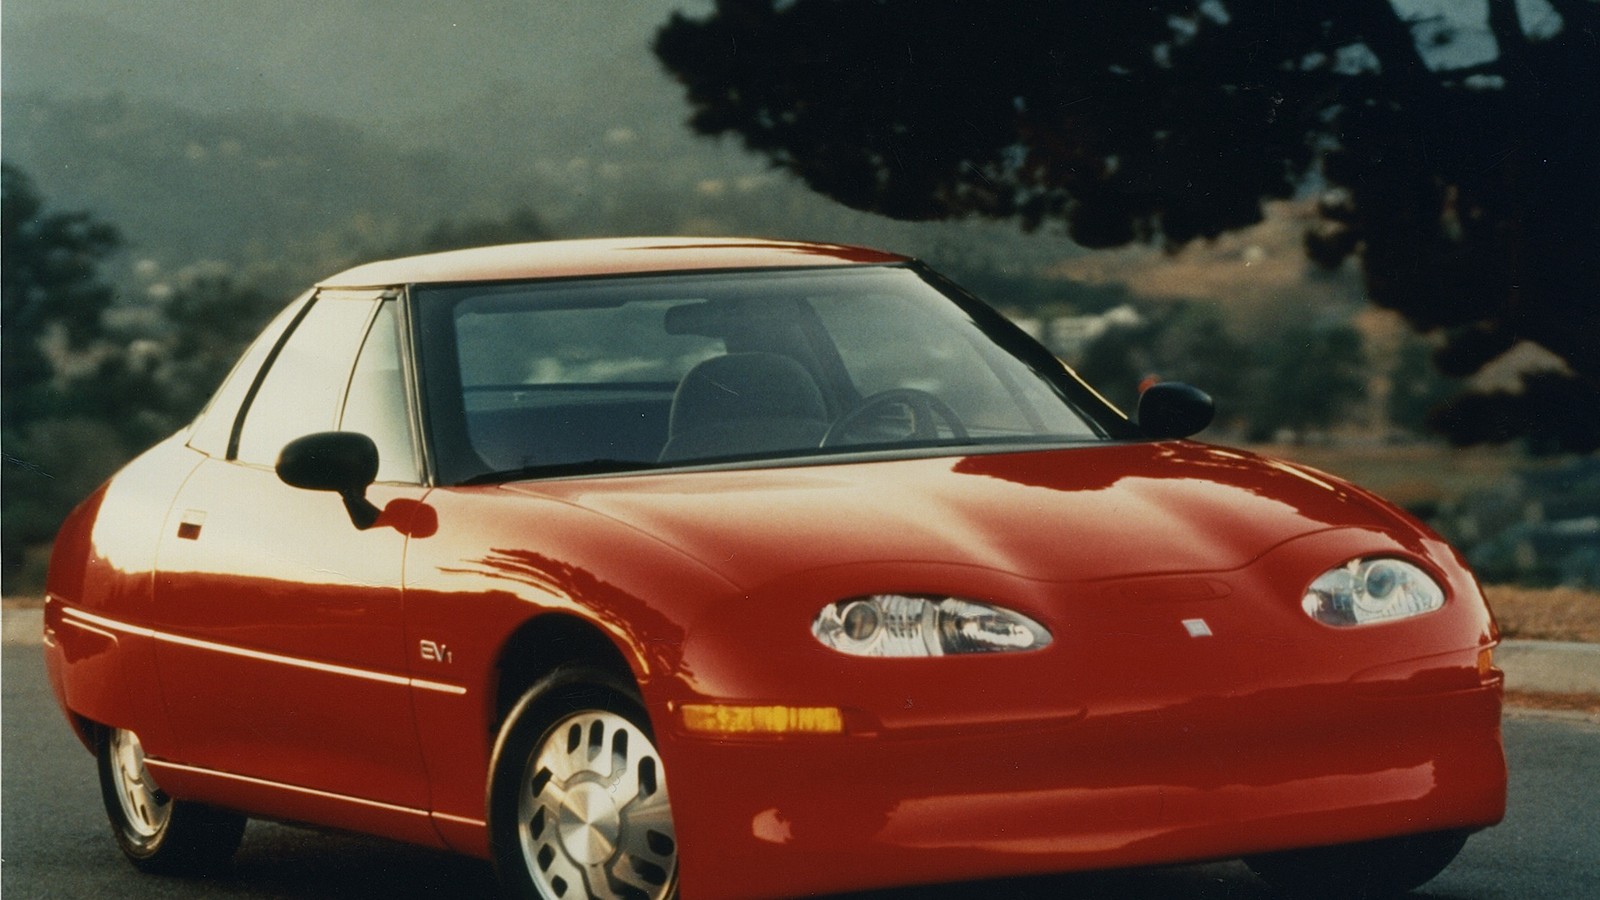 10 classic electric cars you never knew existed - General Motors EV1